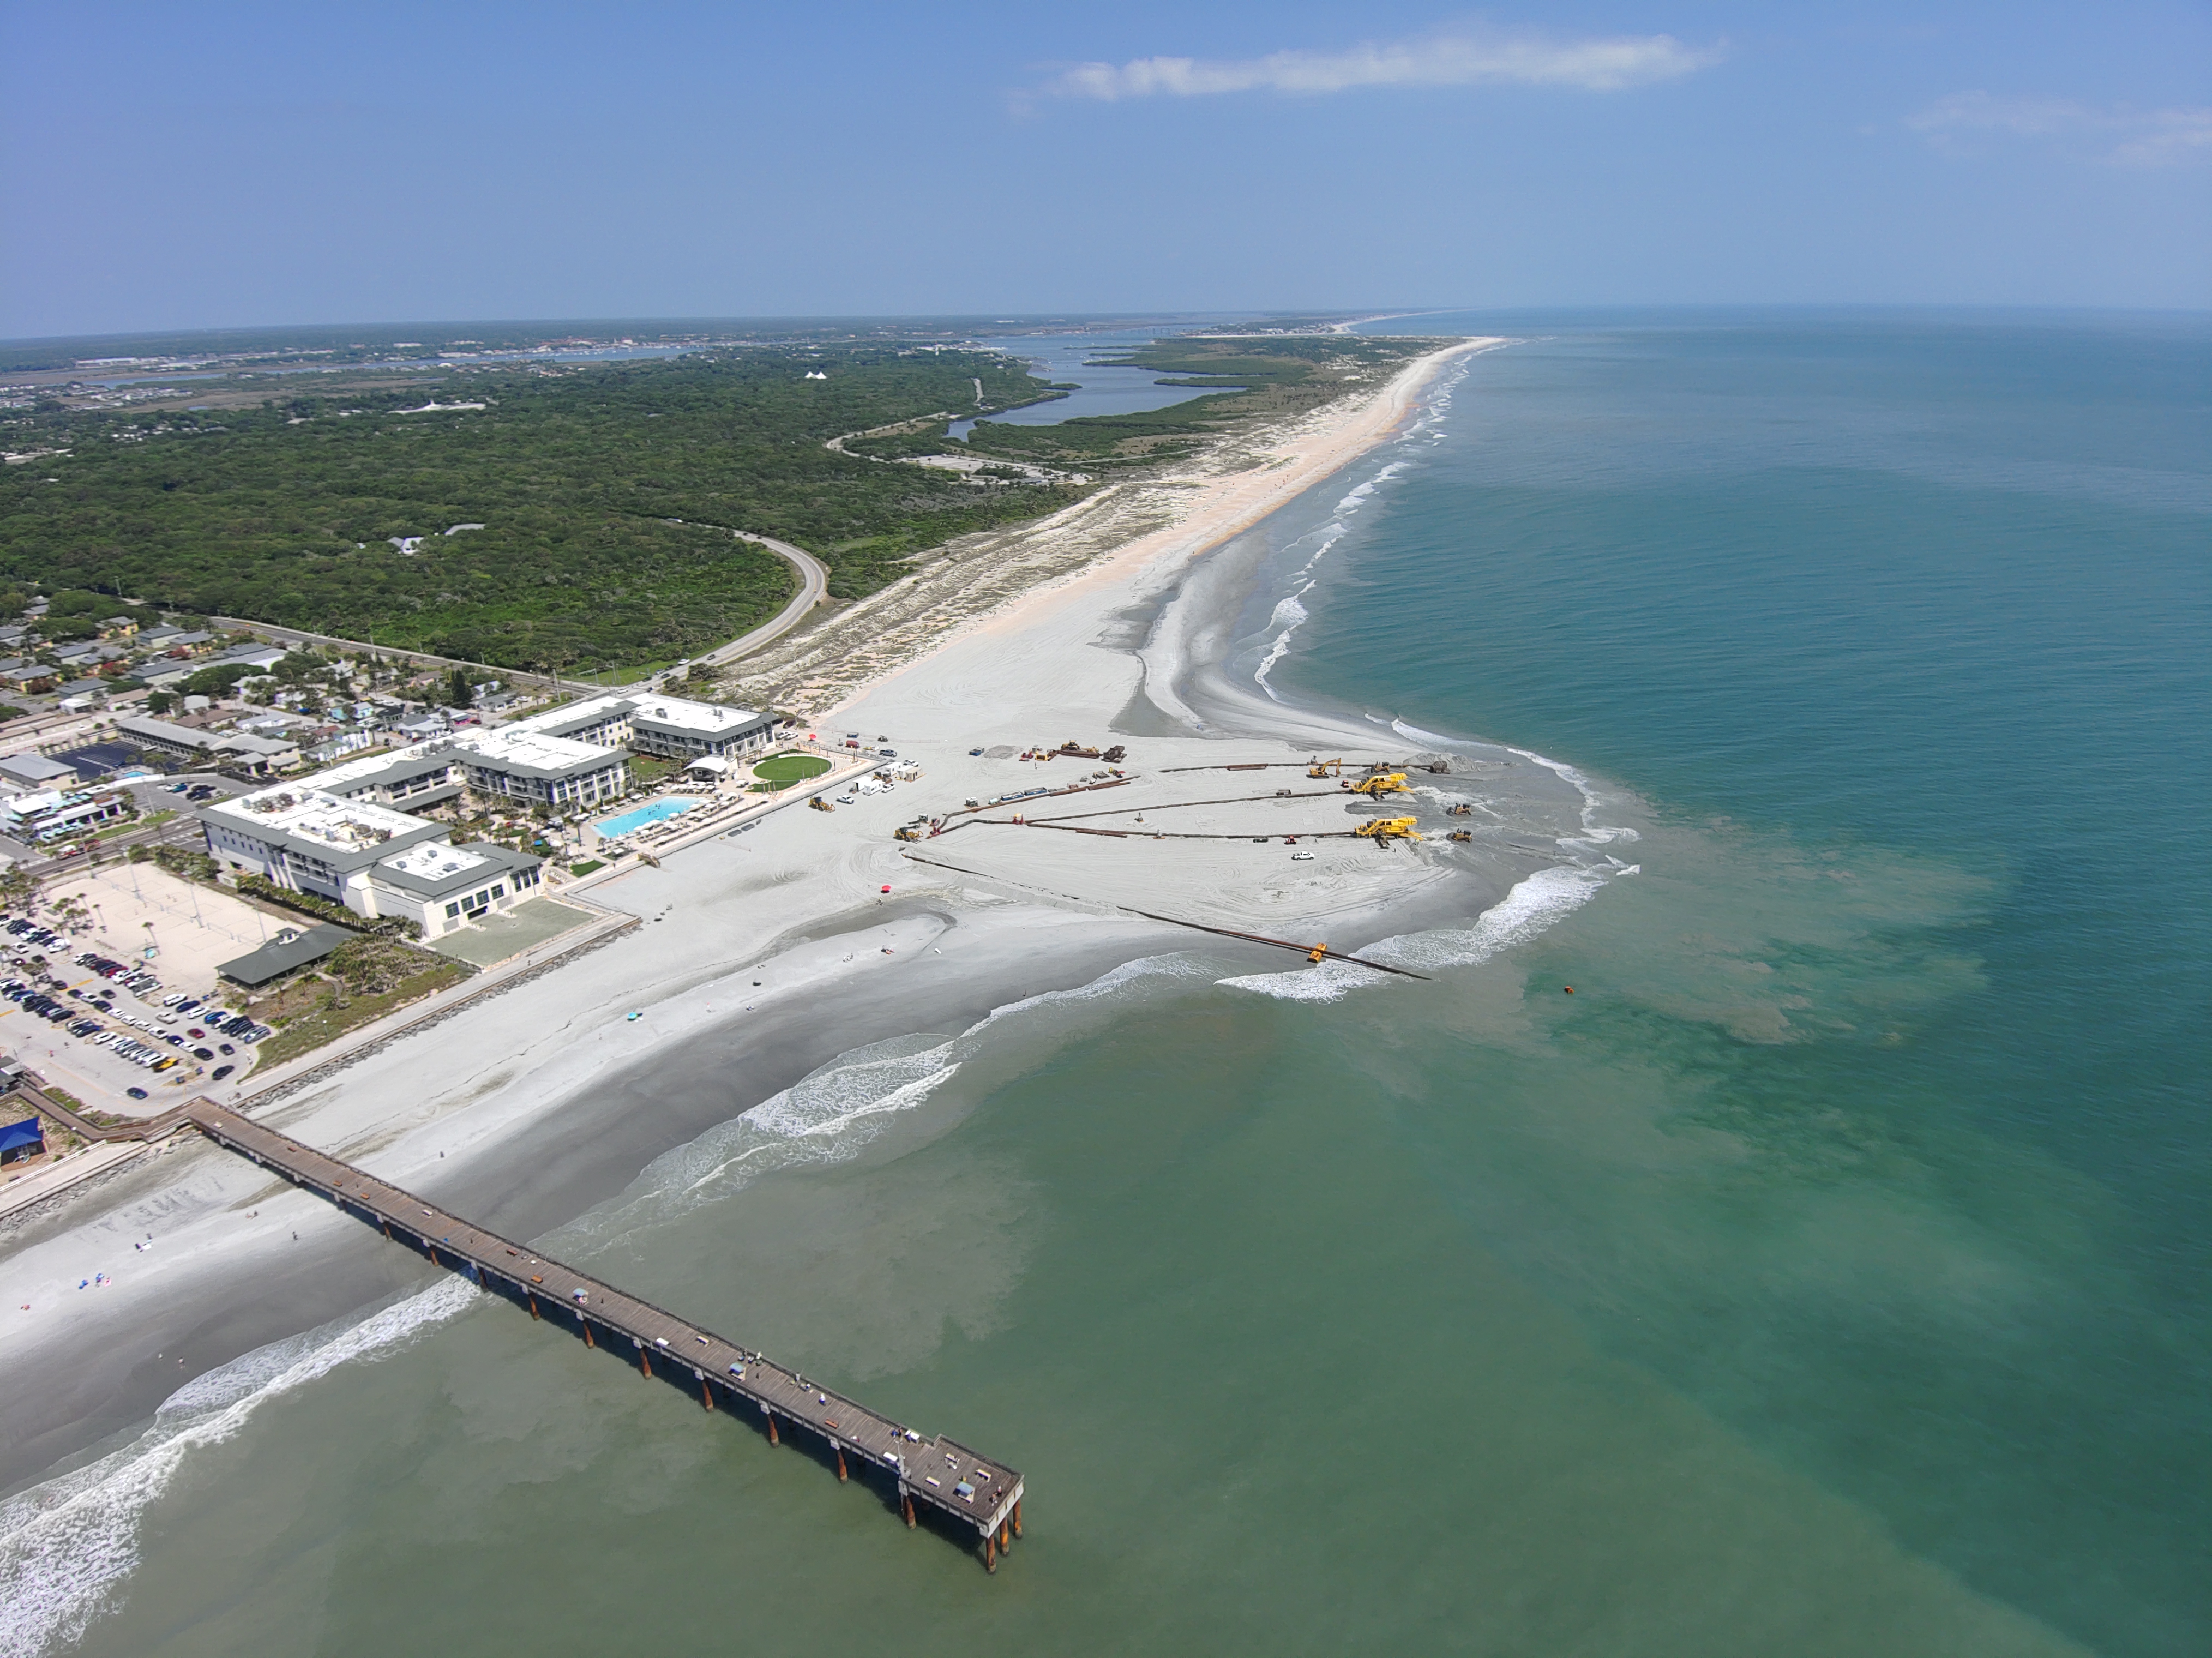 View looking North at the St. Augustine Beach Shore Protection Project.